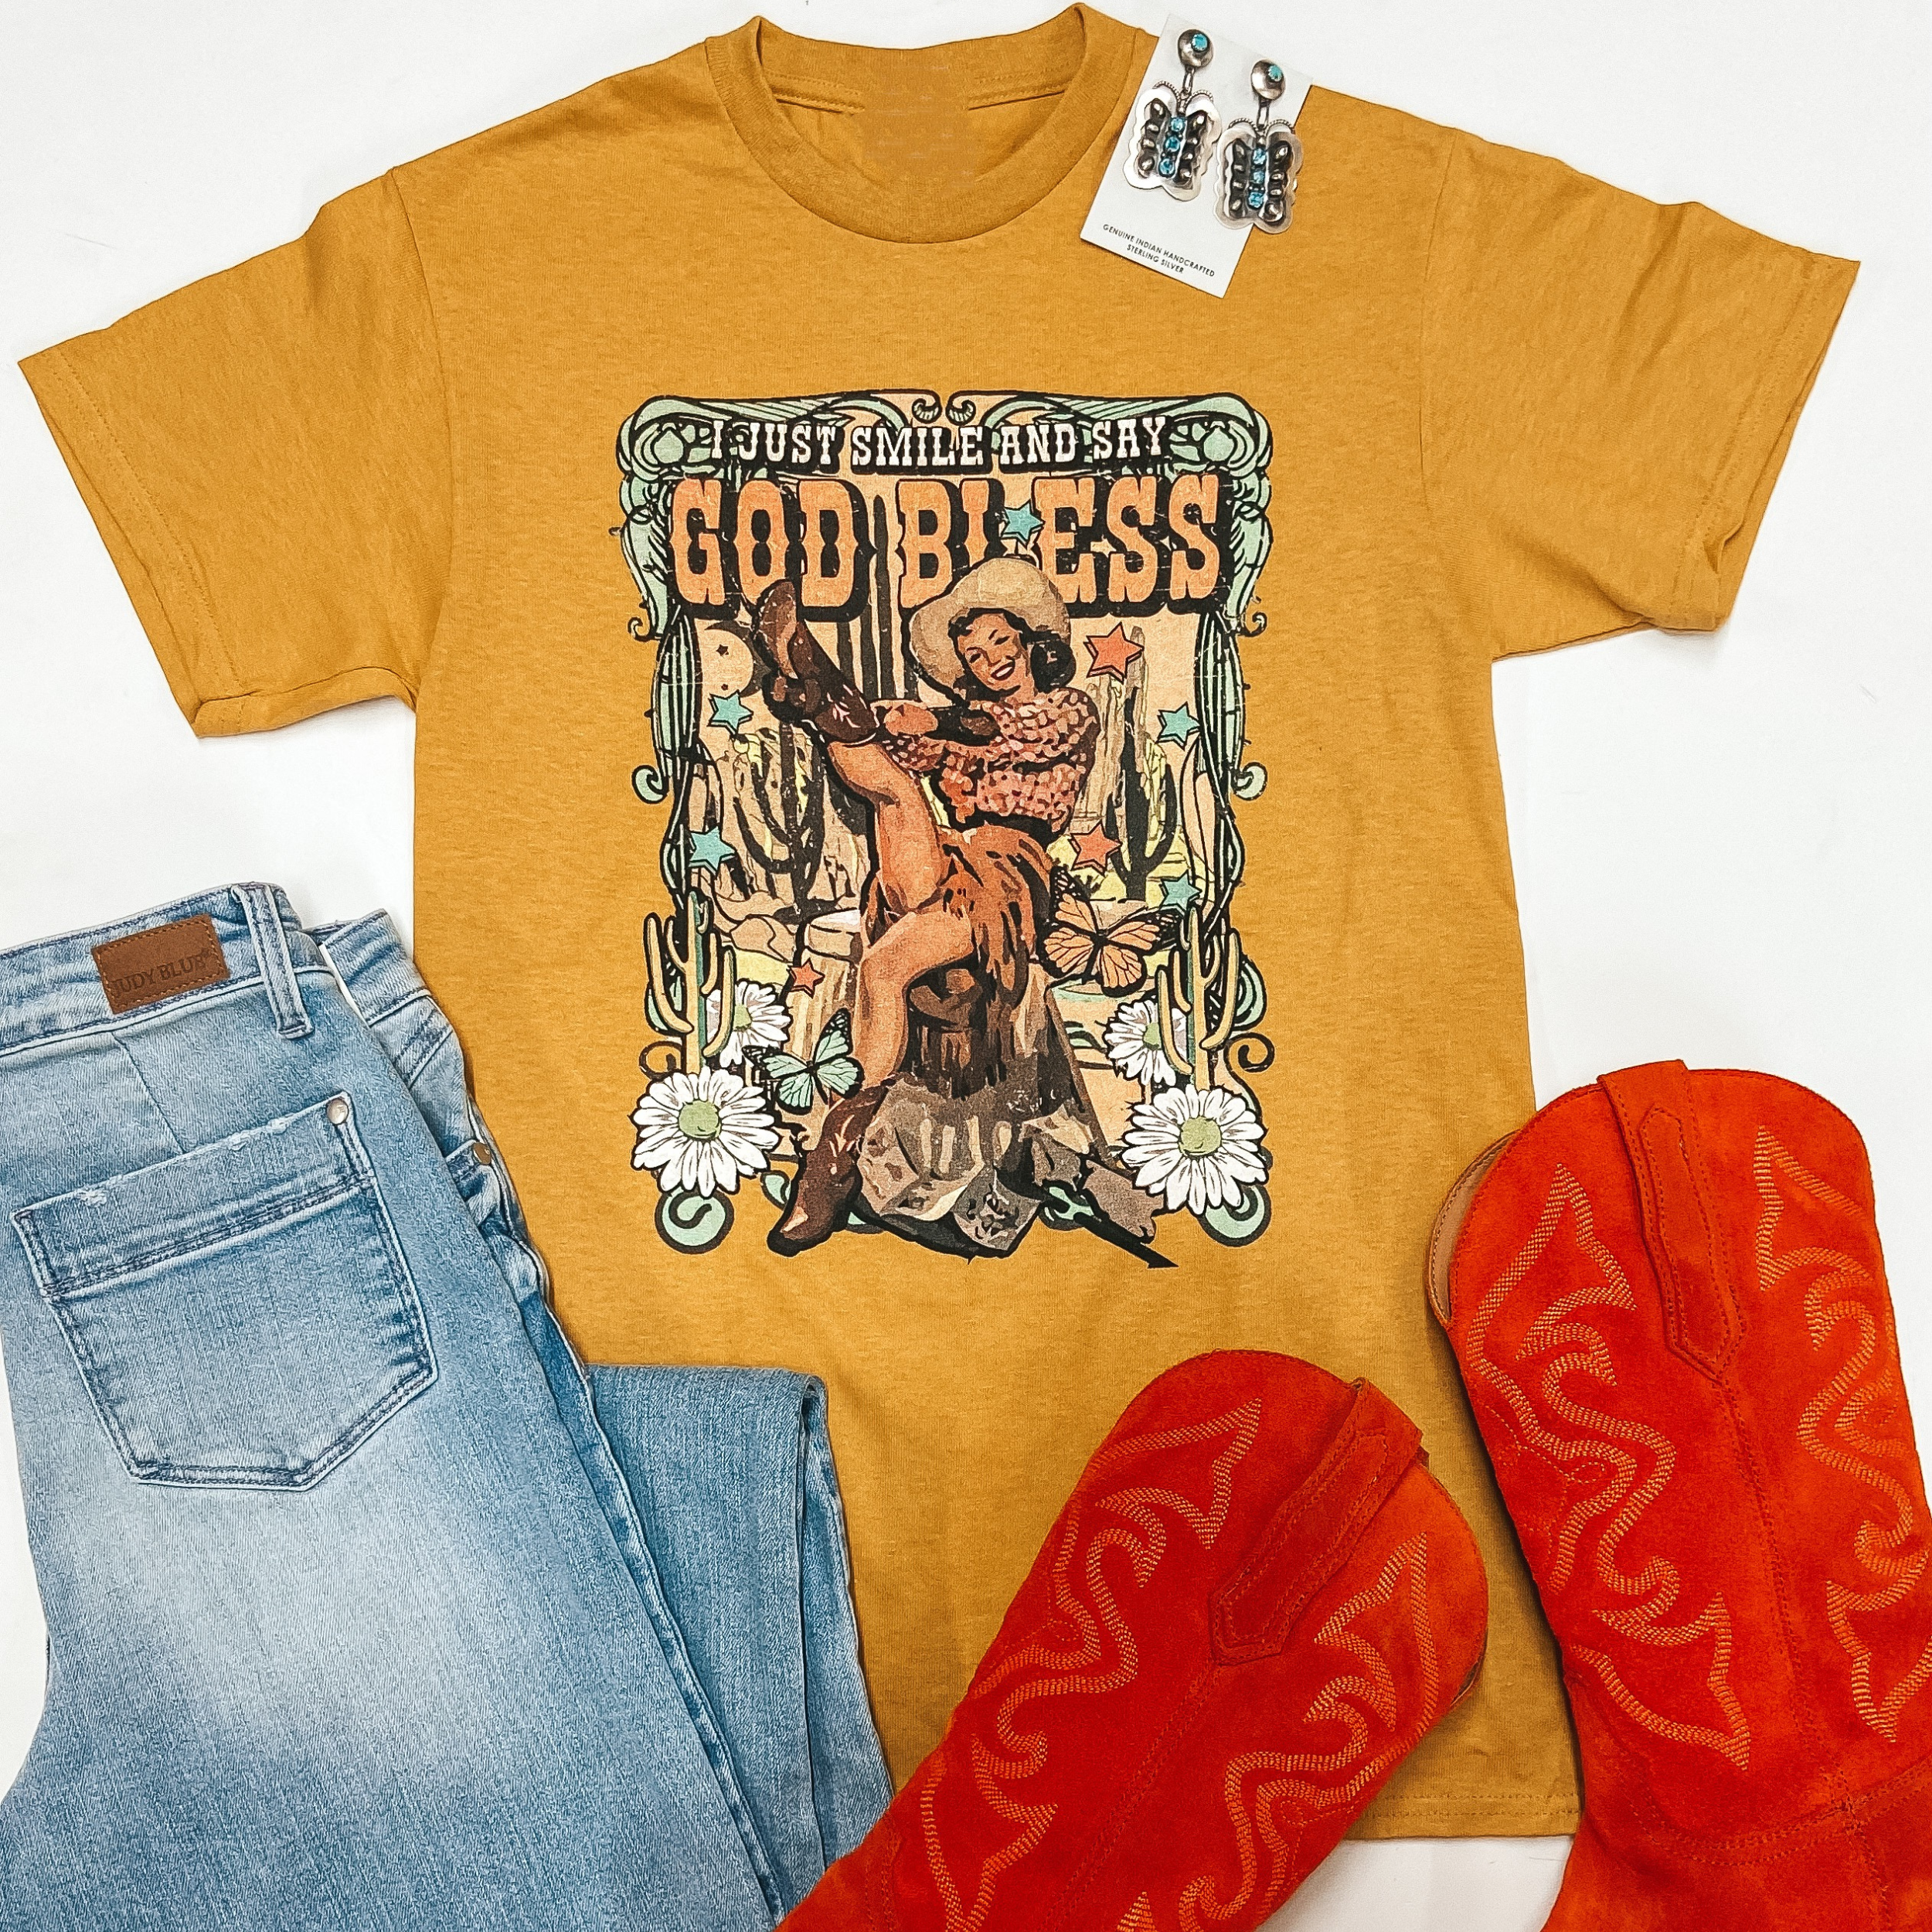 A mustard yellow short sleeve tee shirt is pictured on a white background. On the center of the tee is a graphic of a pin up cowgirl that says "I just smile and say God Bless." It is pictured with orange boots. light wash jeans. and sterling silver earrings.